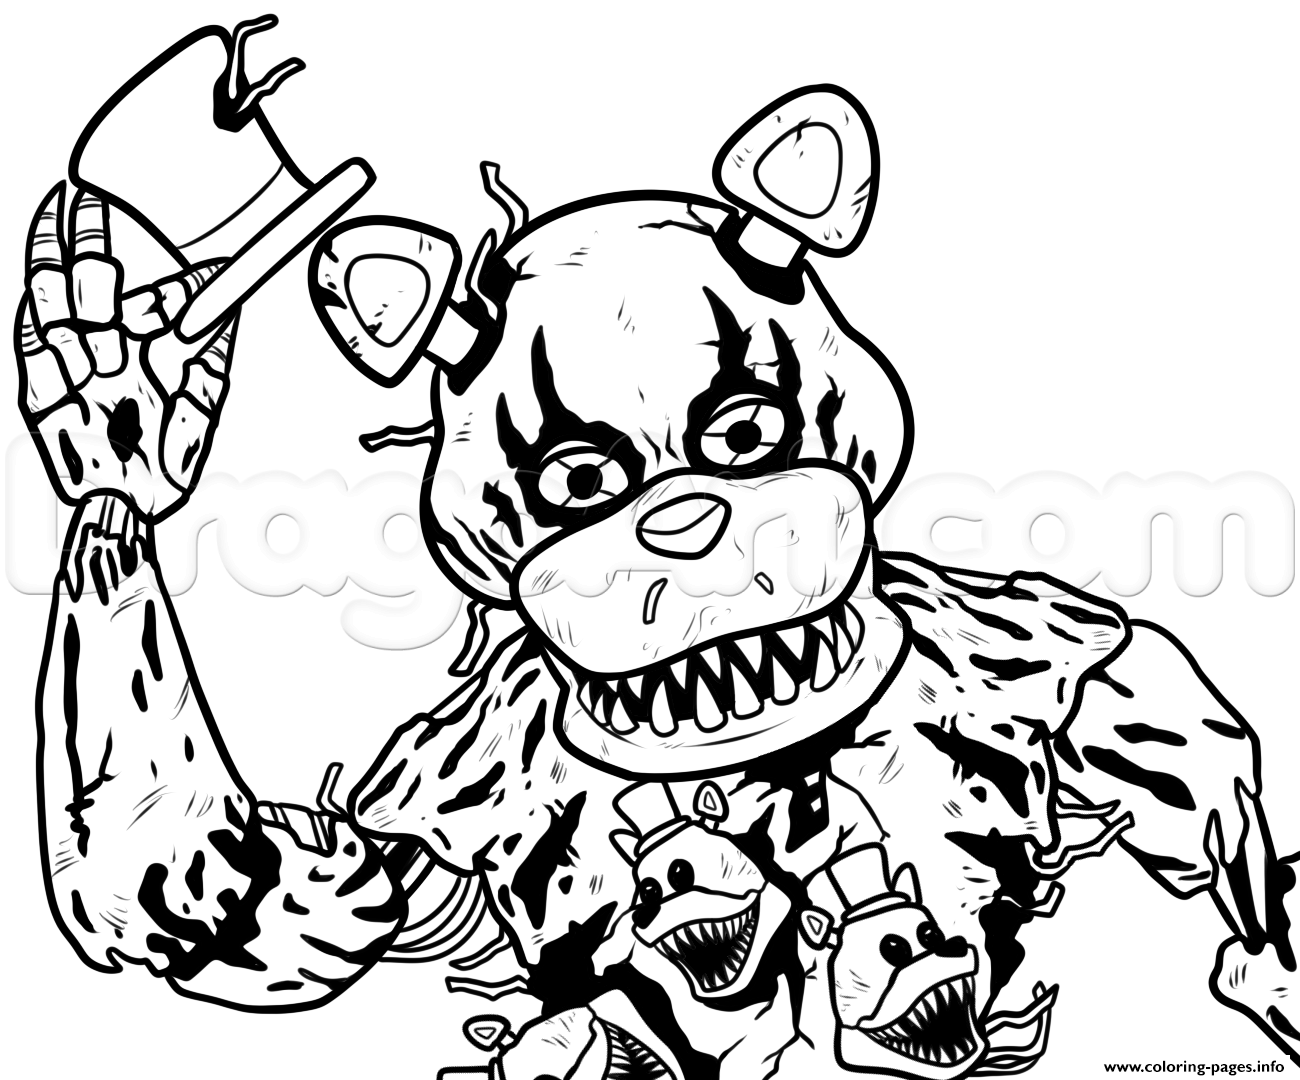 Nightmare Foxy Coloring Pages at GetColorings.com | Free printable